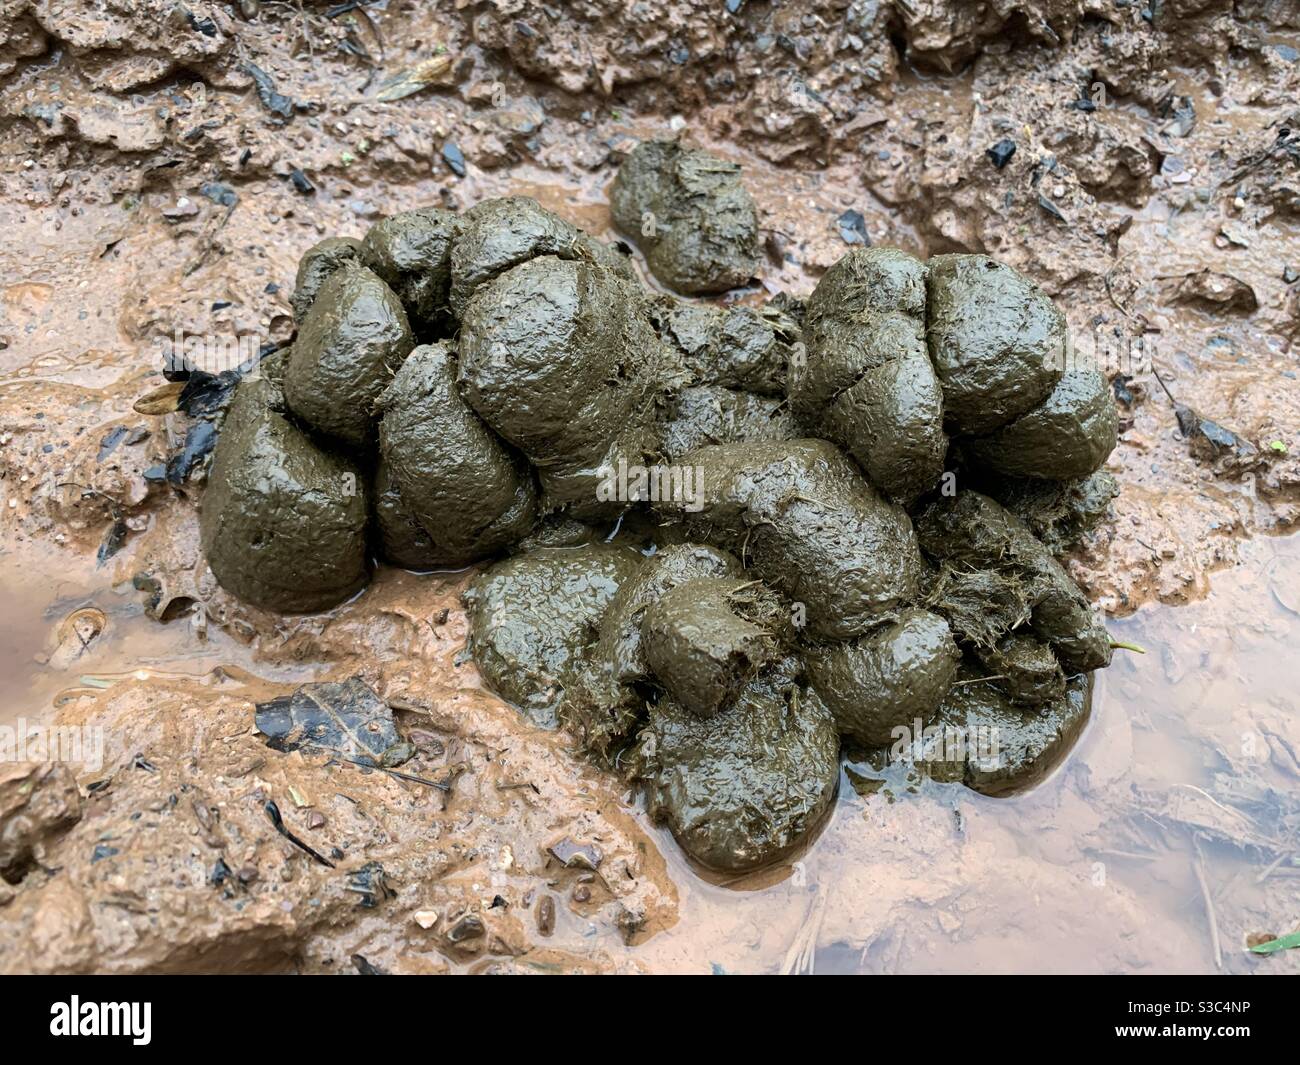 Freshly produced horse droppings on muddy county lane in Somerset, England, UK Stock Photo